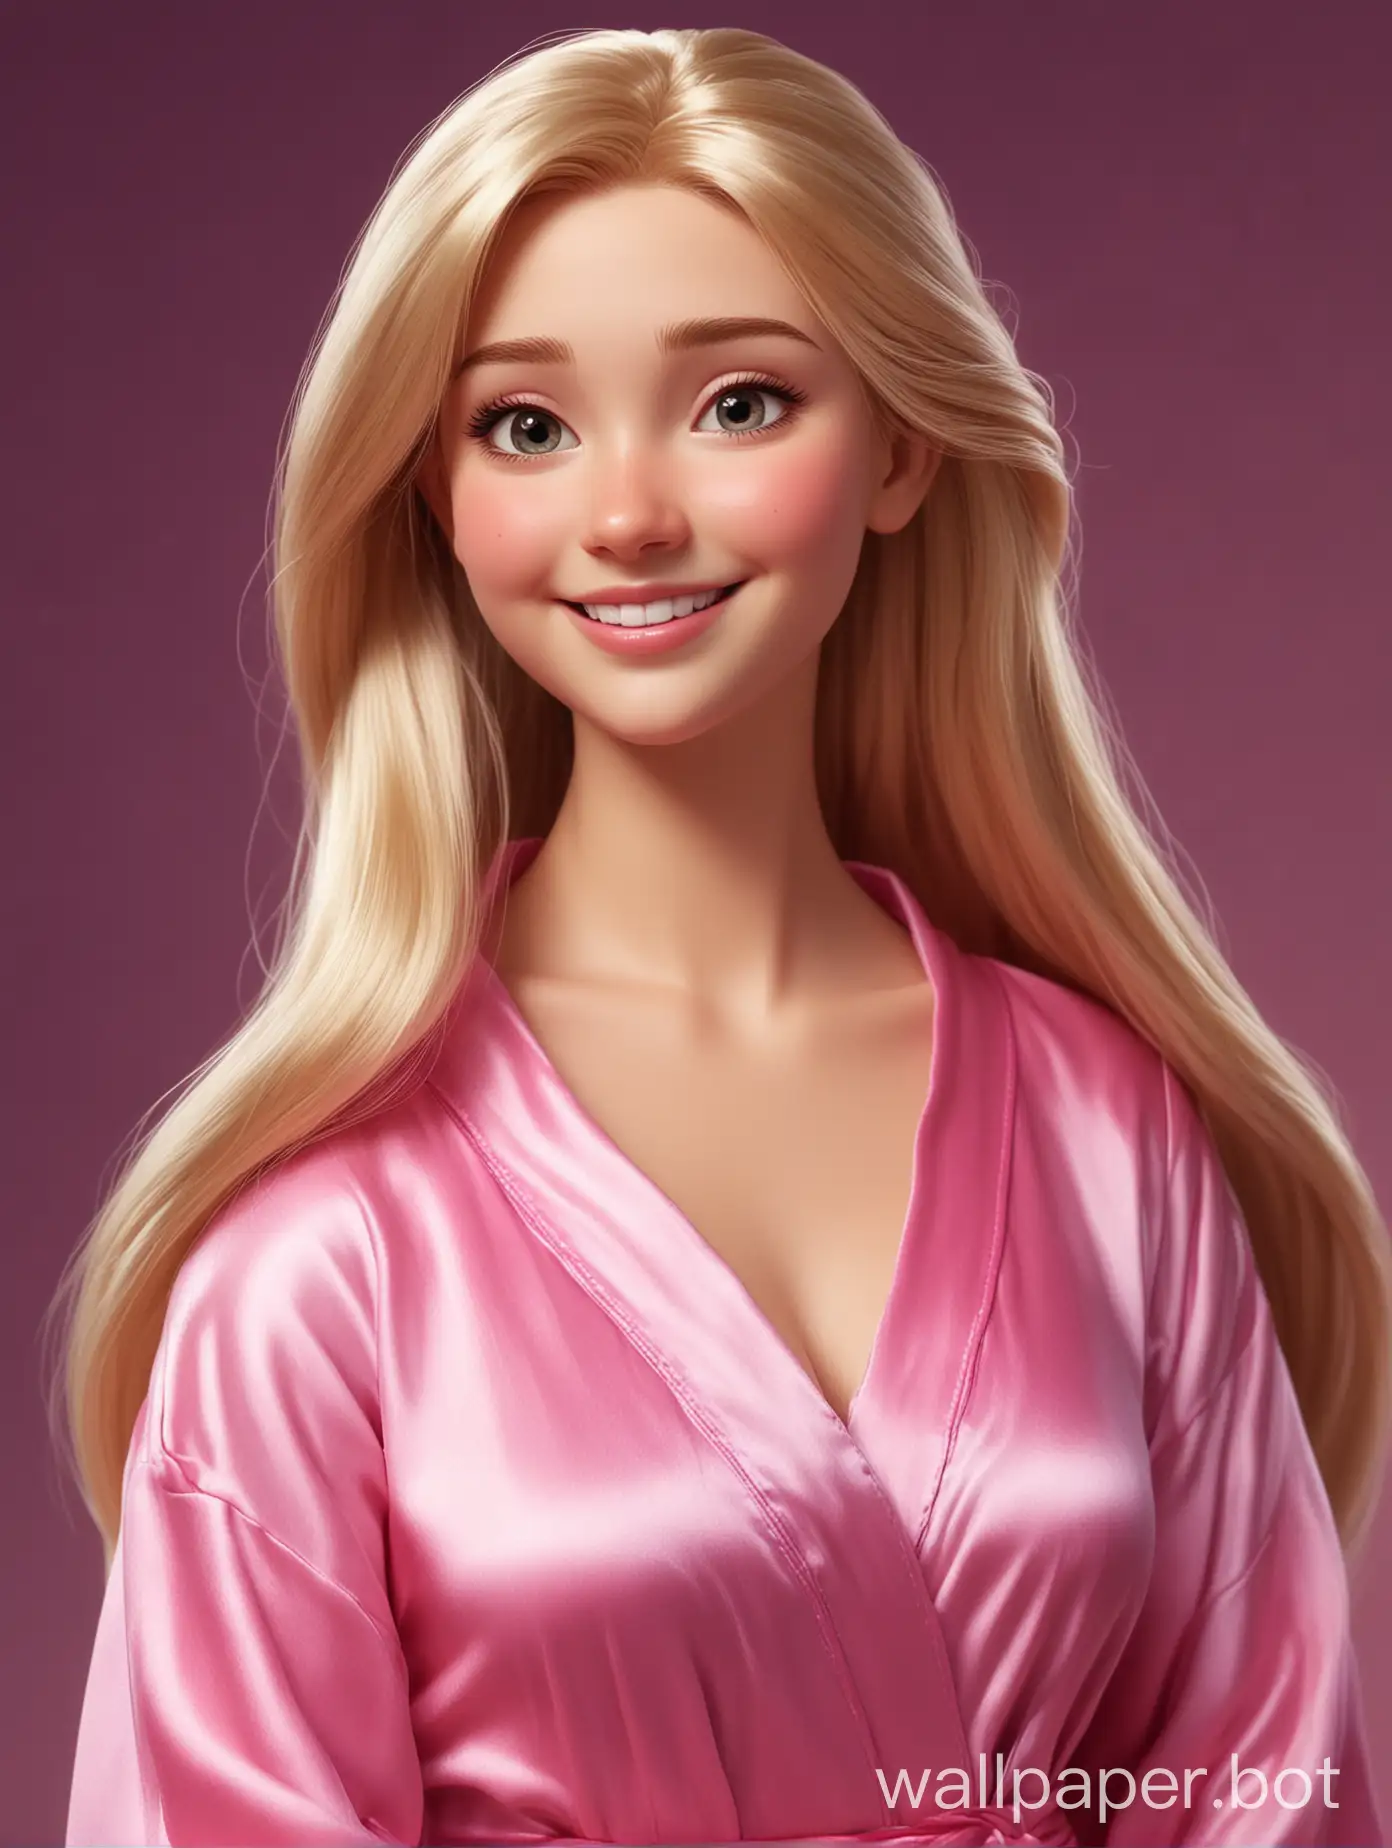 Realistic, Disney-esque cutie Rapunzel smiles with long, straight silky hair in a silk robe the color of pink fuchsia.